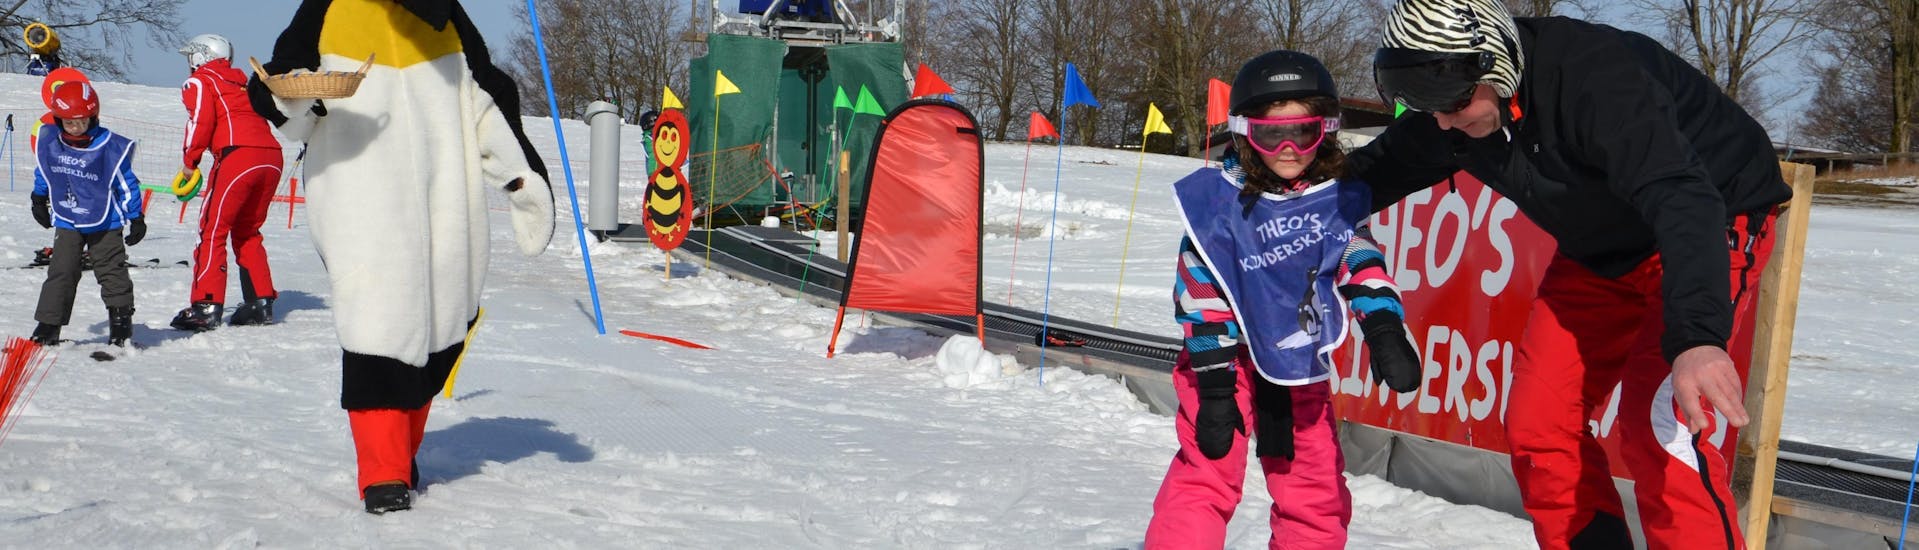 A ski instructor from the Skischule Sahneberg shows a little girl some exercises during the private ski lessons for kids and teens for all levels.